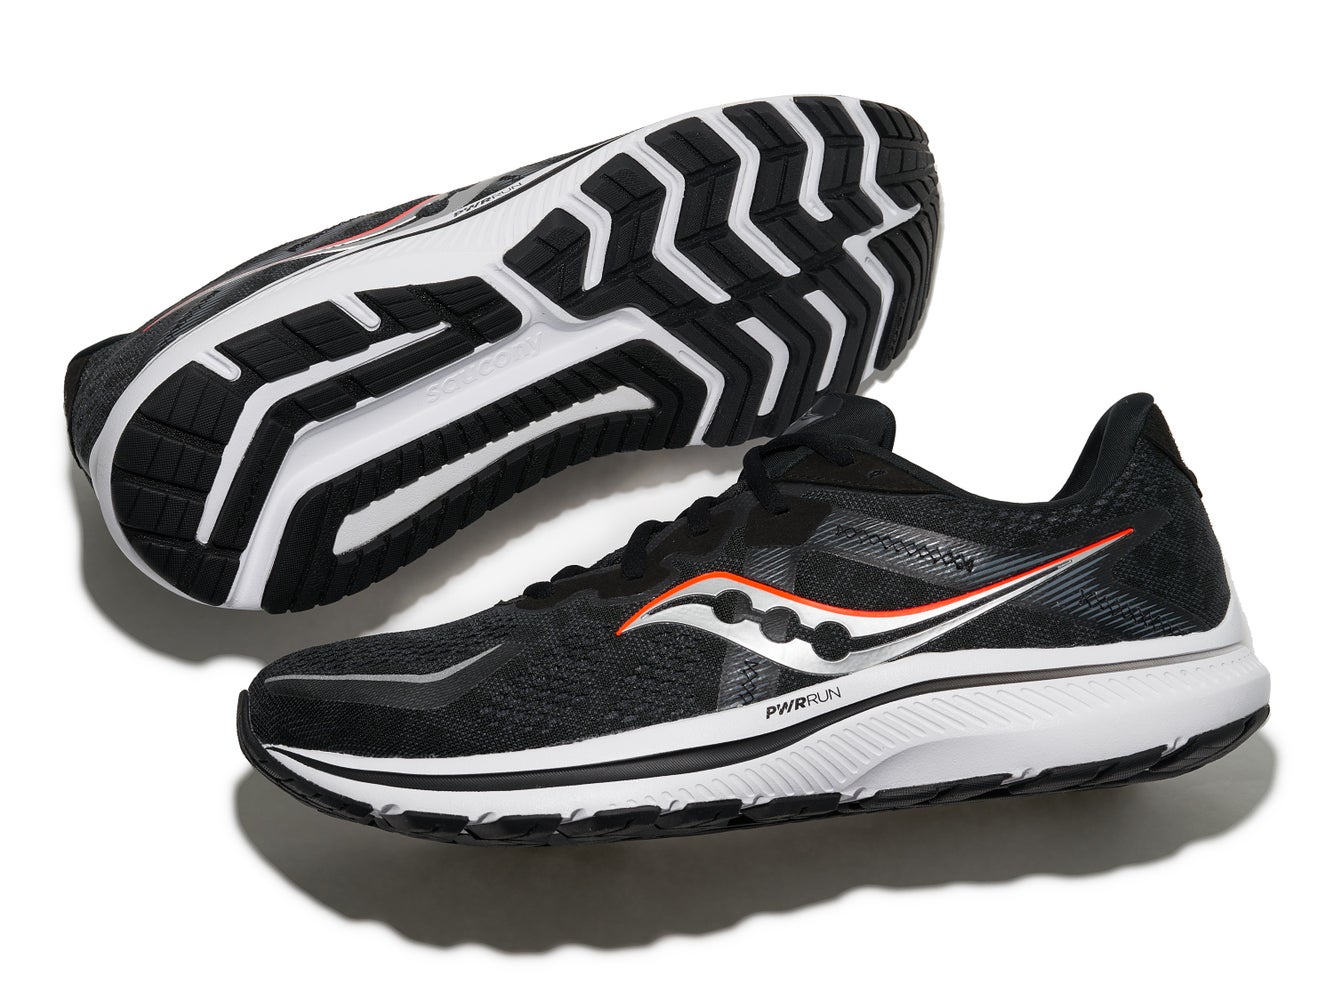 Saucony Omni 20 Shoe Review | Running Warehouse